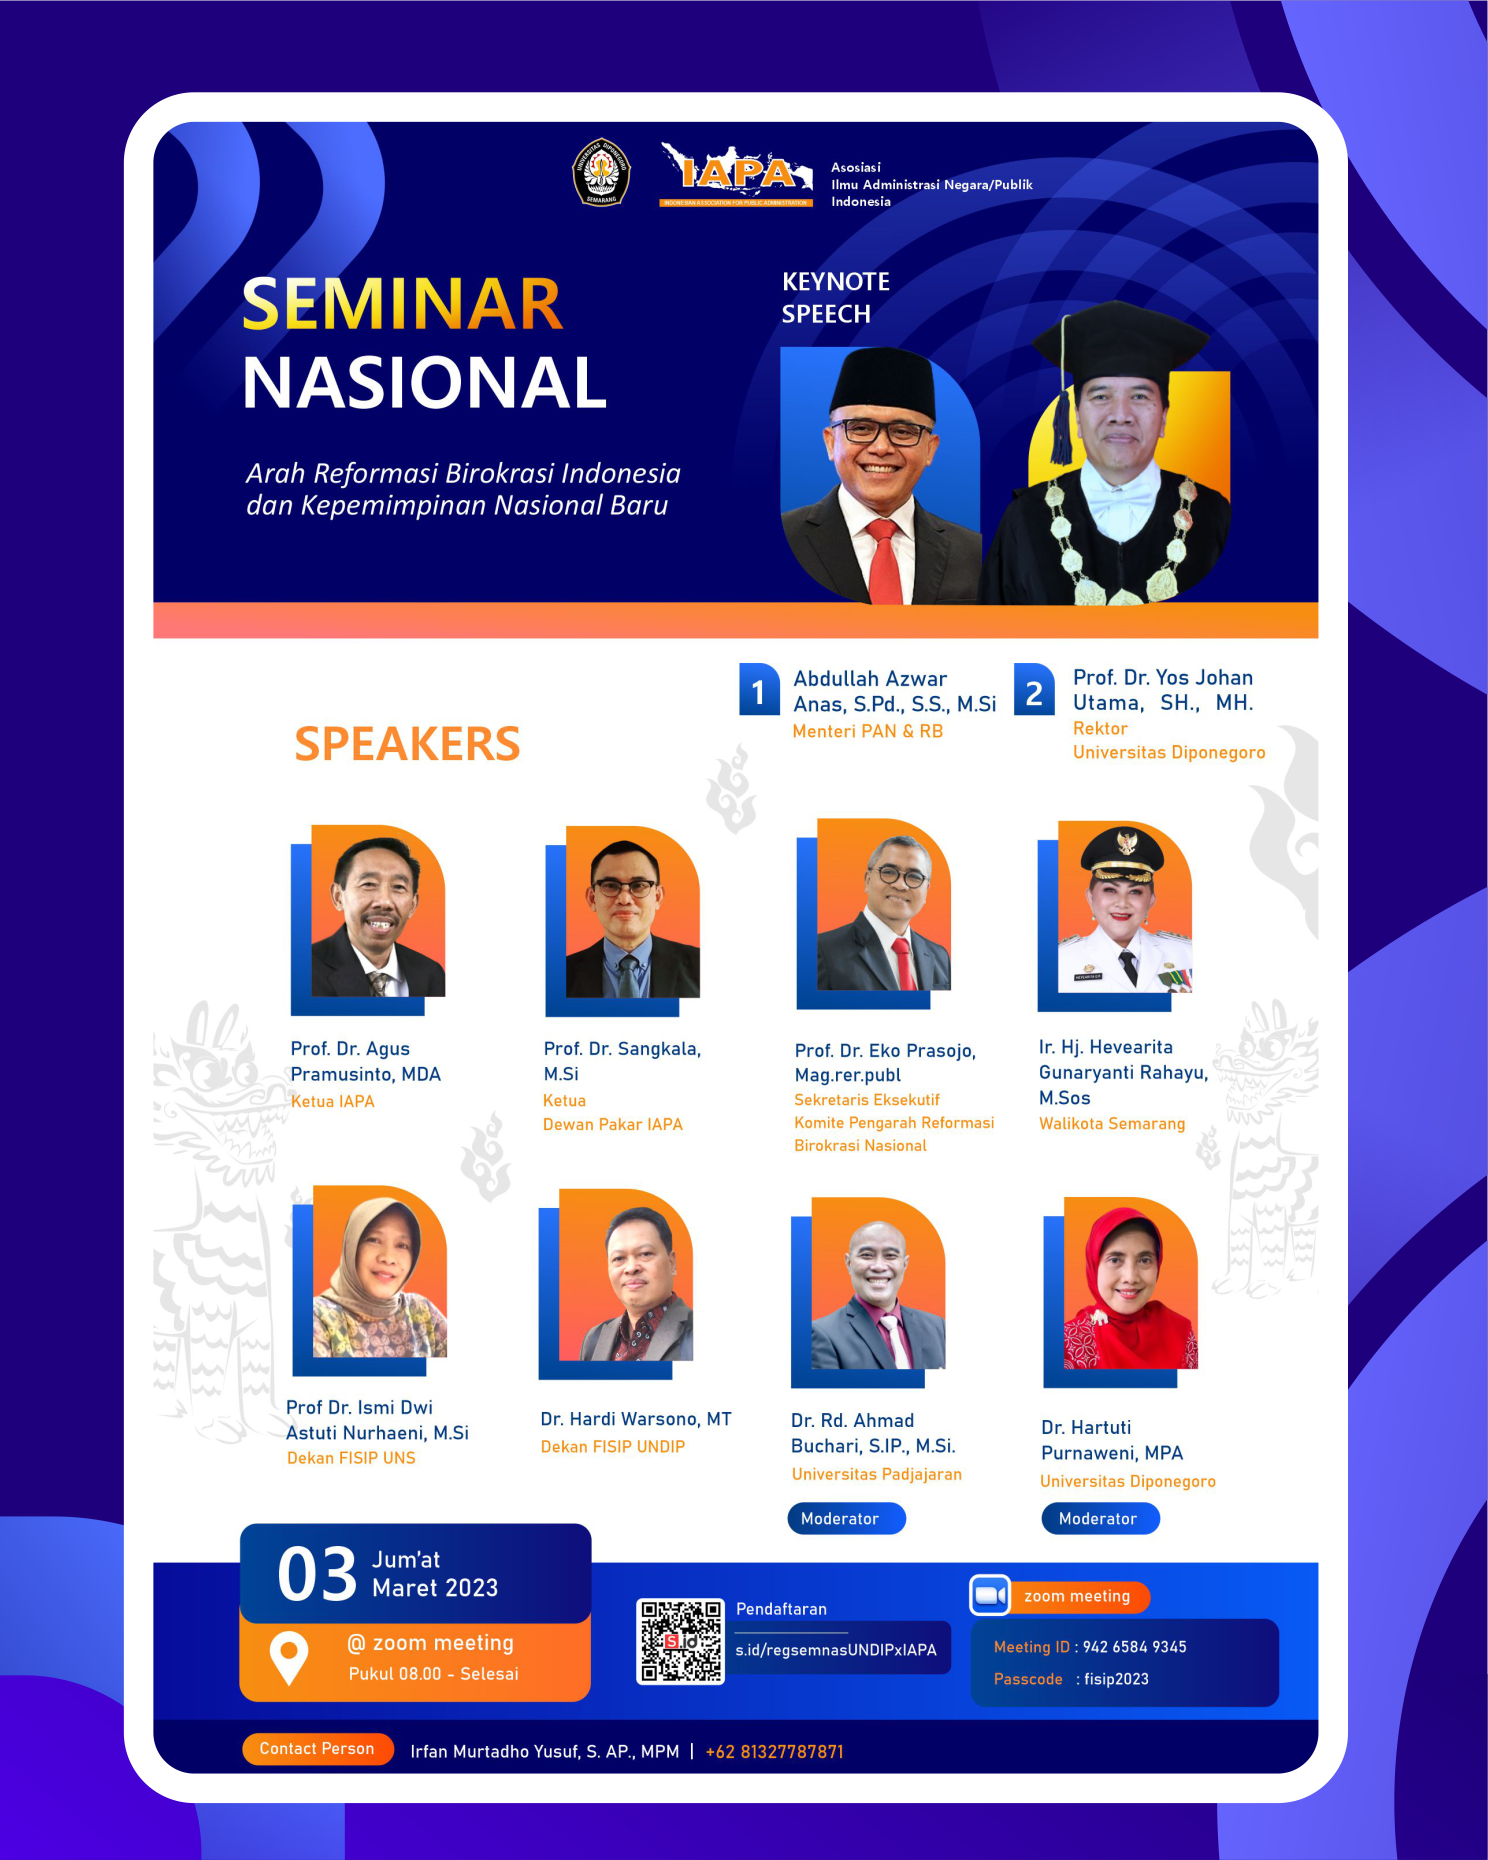 National Seminar, “The Way of Indonesian Bureaucratic Reform and the New National Leadership”